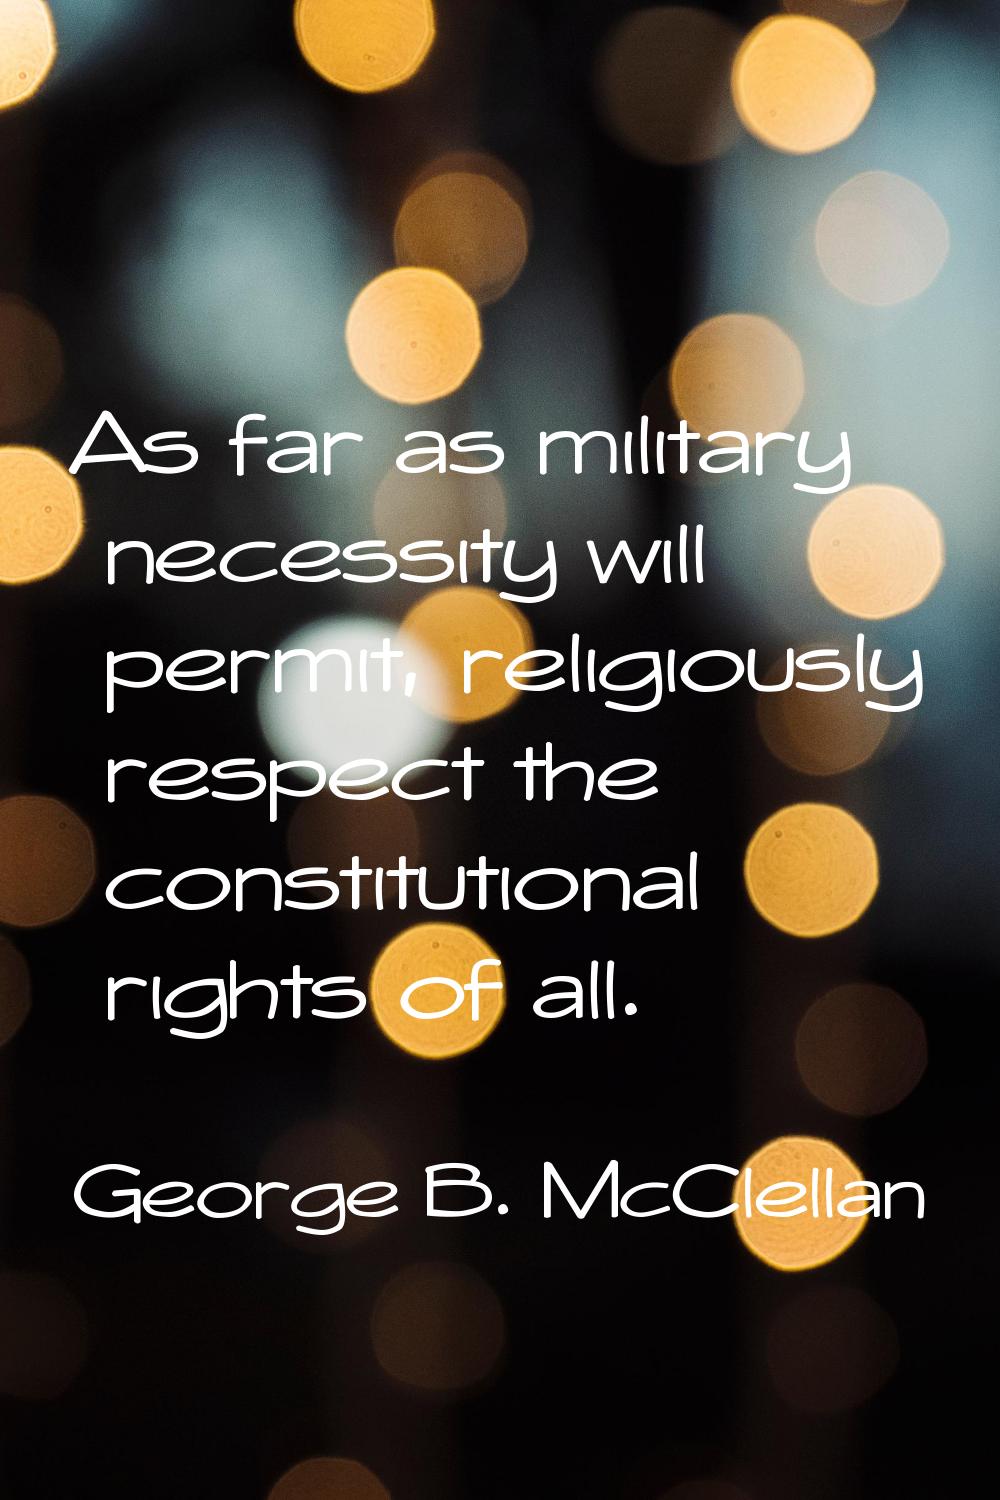 As far as military necessity will permit, religiously respect the constitutional rights of all.